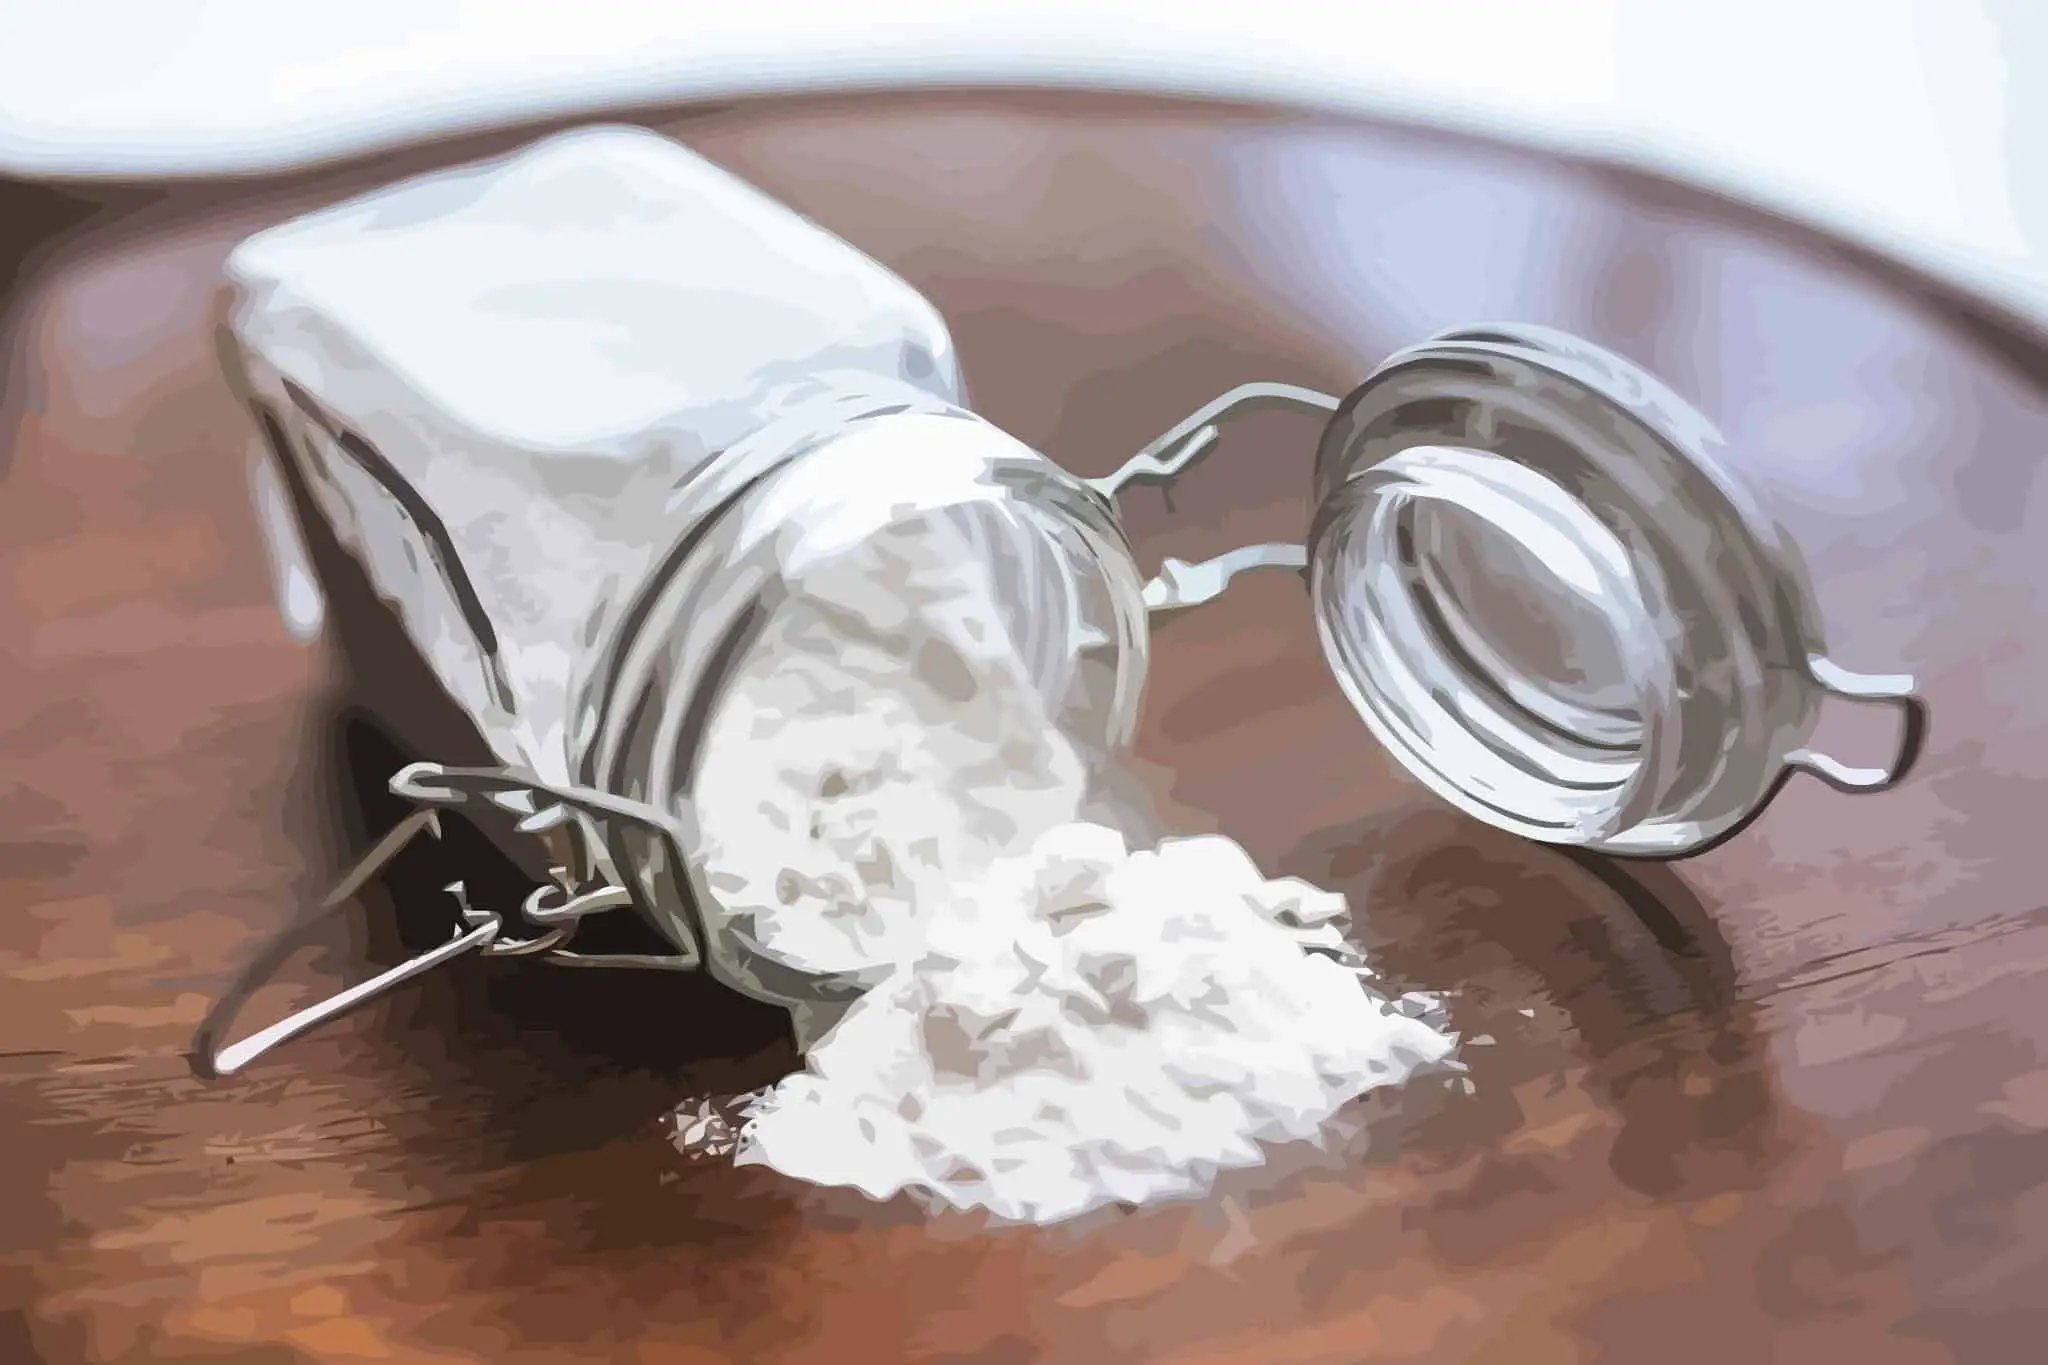 How To Make Cornstarch Step-By-Step Instructions